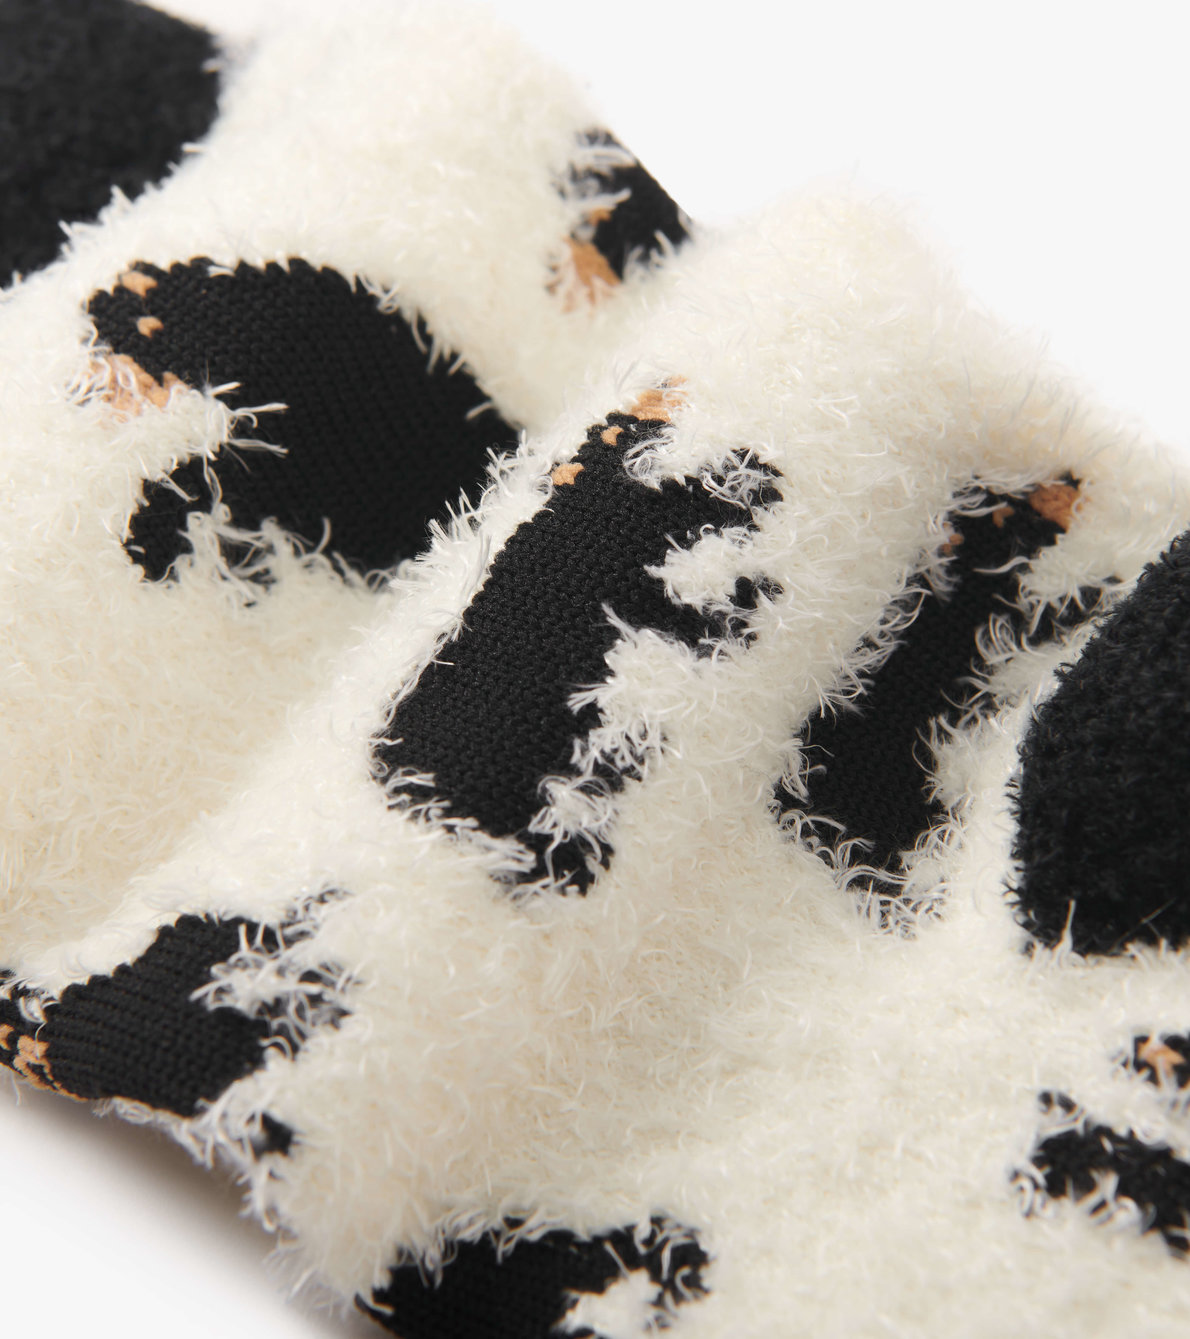 View larger image of Black Bears Fuzzy Socks